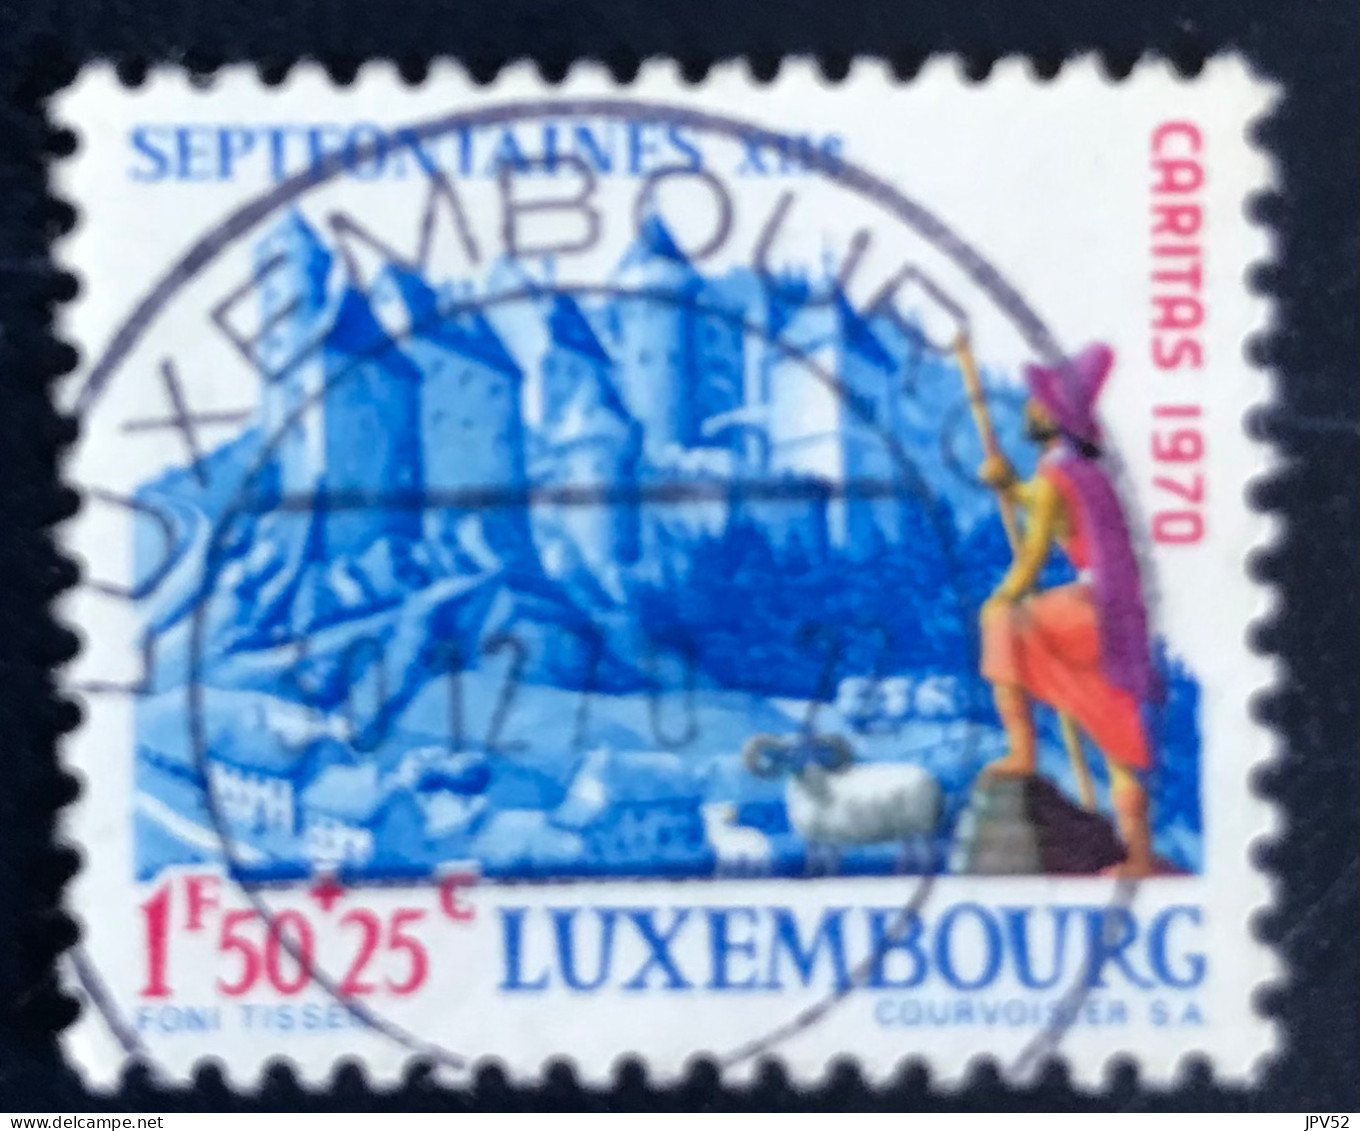 Luxembourg - Luxemburg - C18/34 - 1970 - (°)used - Michel 815 - Burcht Van Septfontaines - LUXEMBOURG - Usados